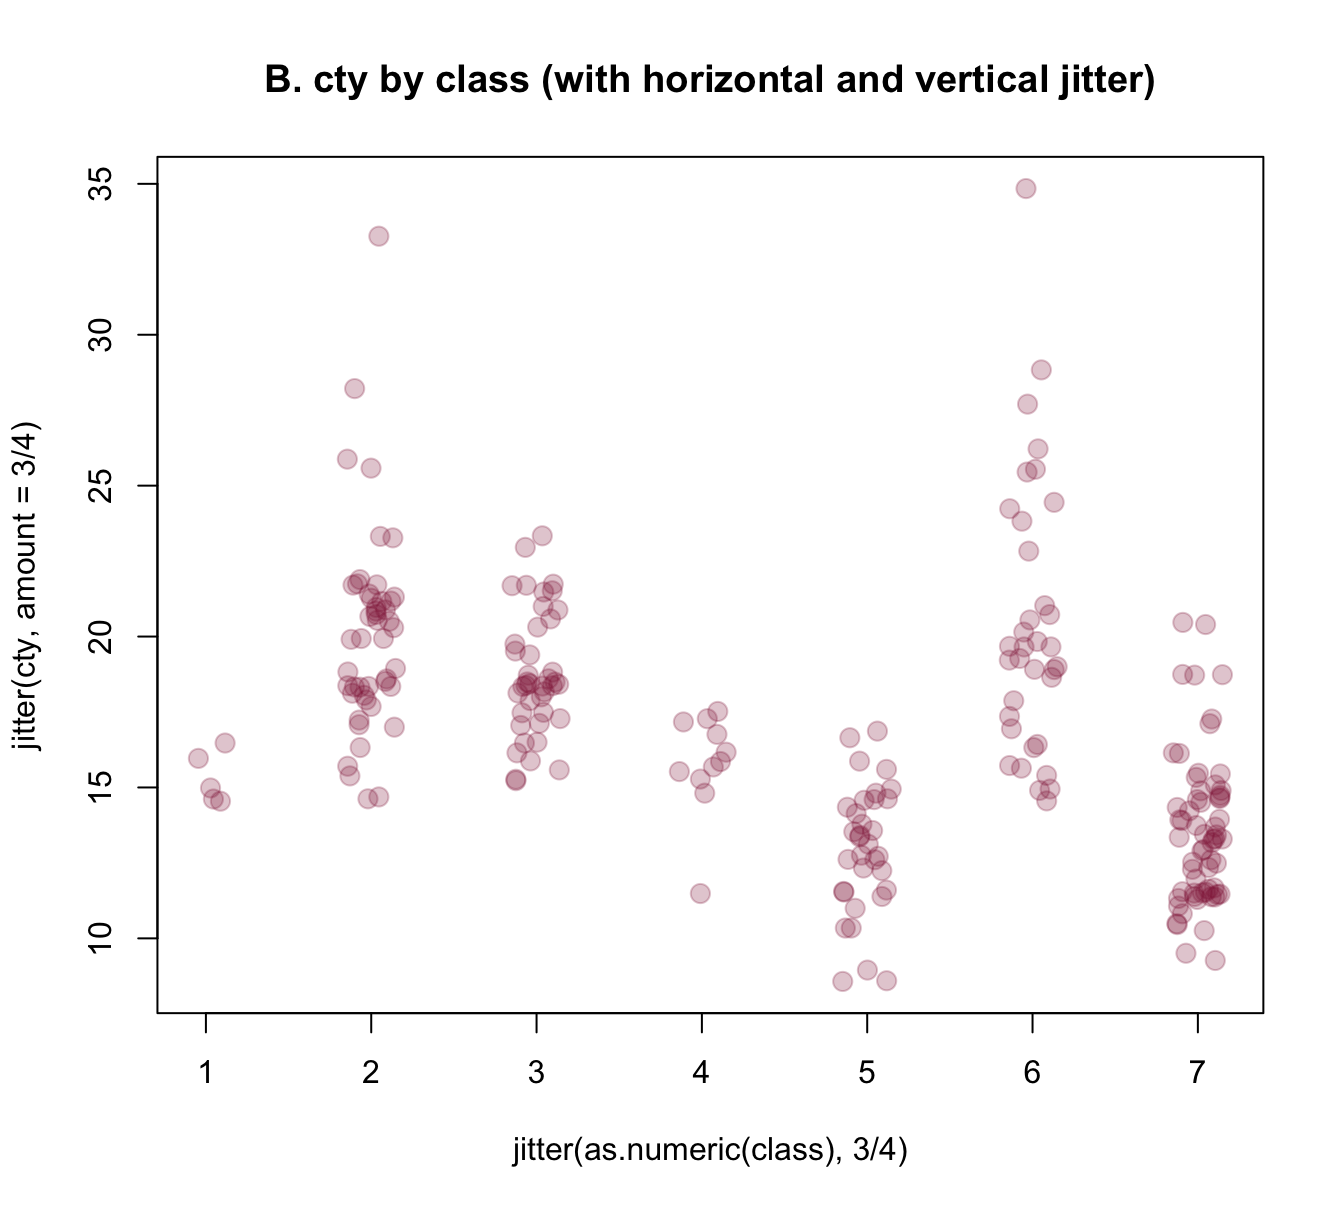 Jittering categorical or/and continuous variables to show raw data points as scatterplots.